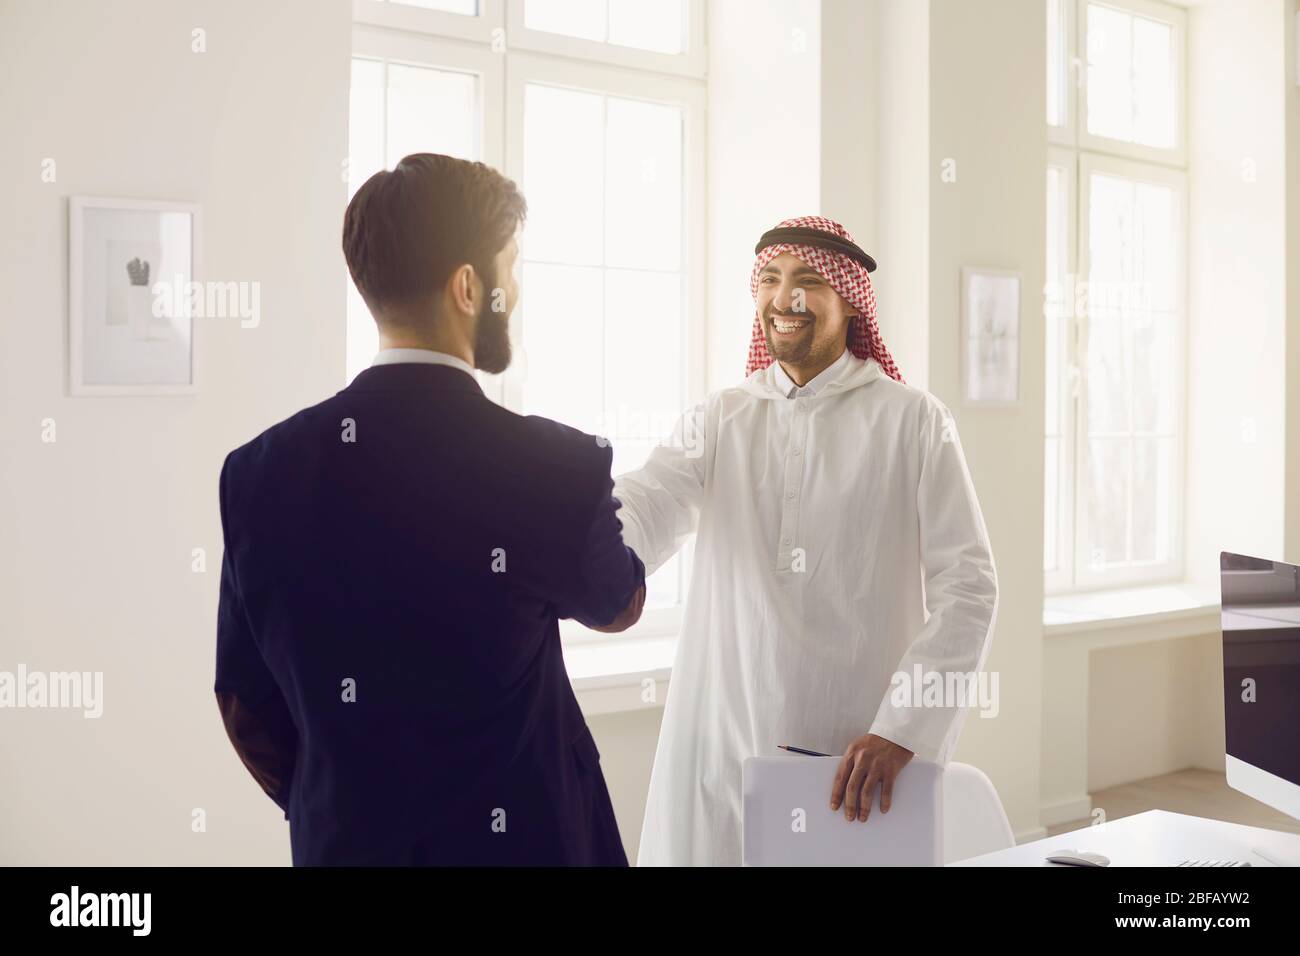 Handshake of arabic and european businesspeople in office. Stock Photo